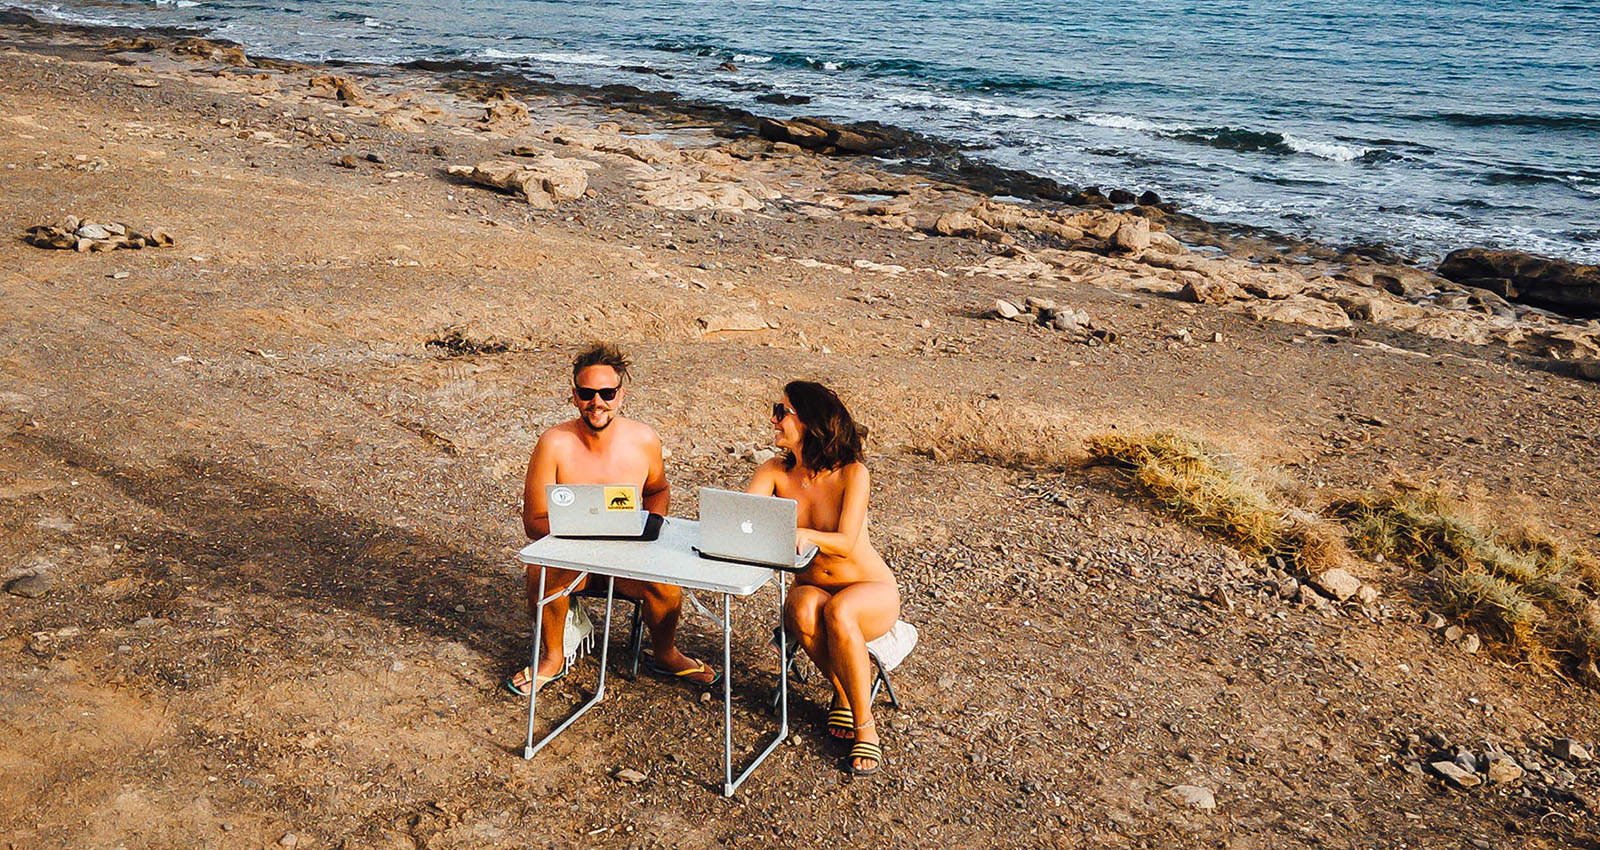 Is the end of free naturist content near?